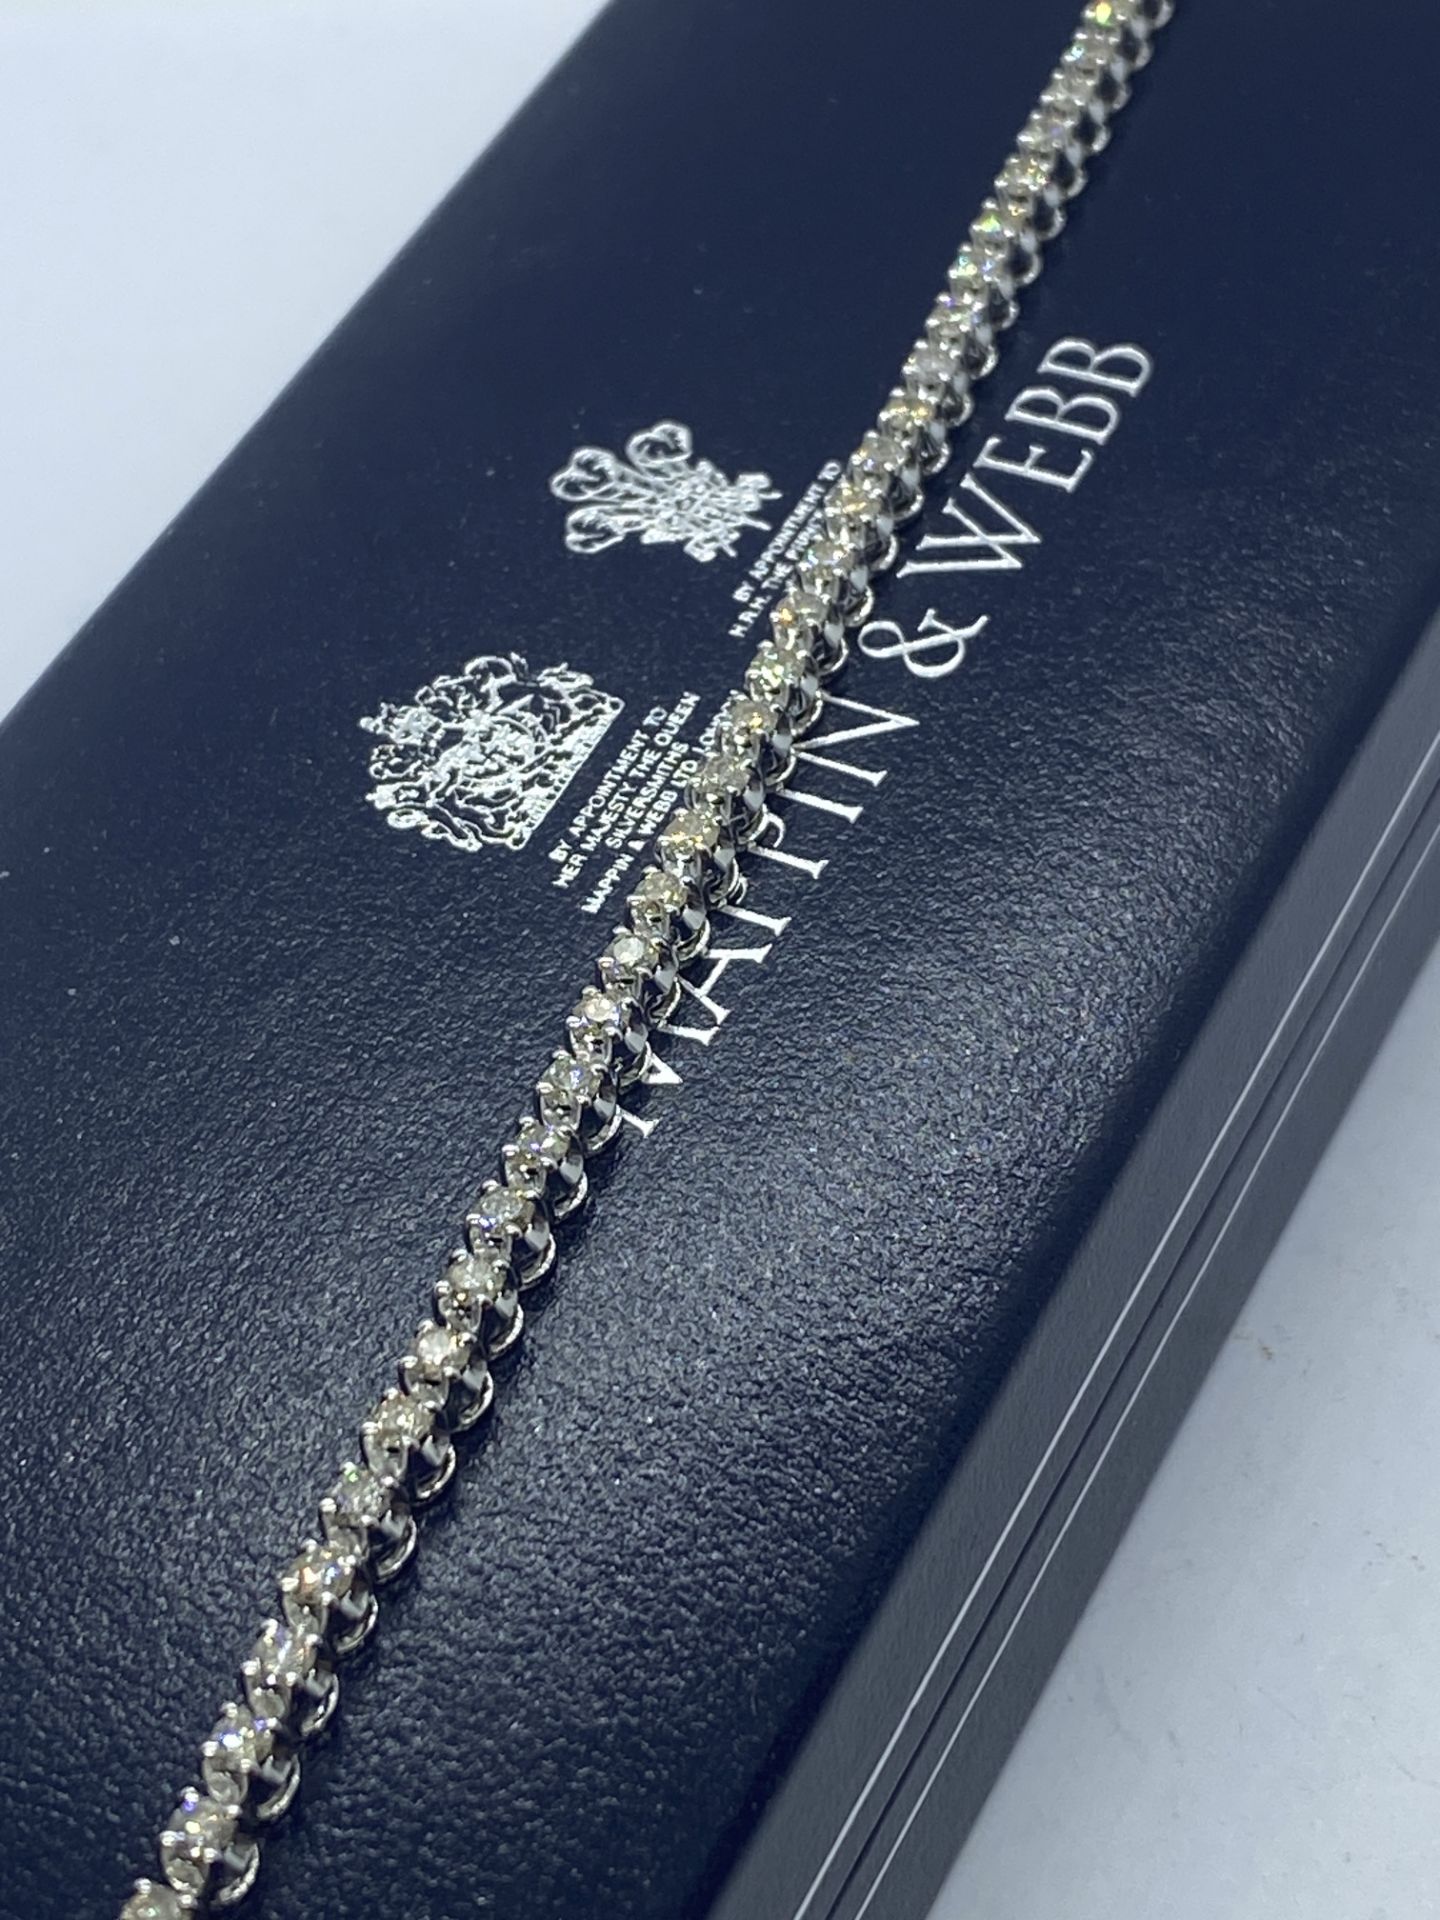 4.00ct NATURAL DIAMOND TENNIS BRACELET SET WHITE GOLD - F/G/H SI1 WITH £5800 INSURANCE VALUATION - Image 2 of 3